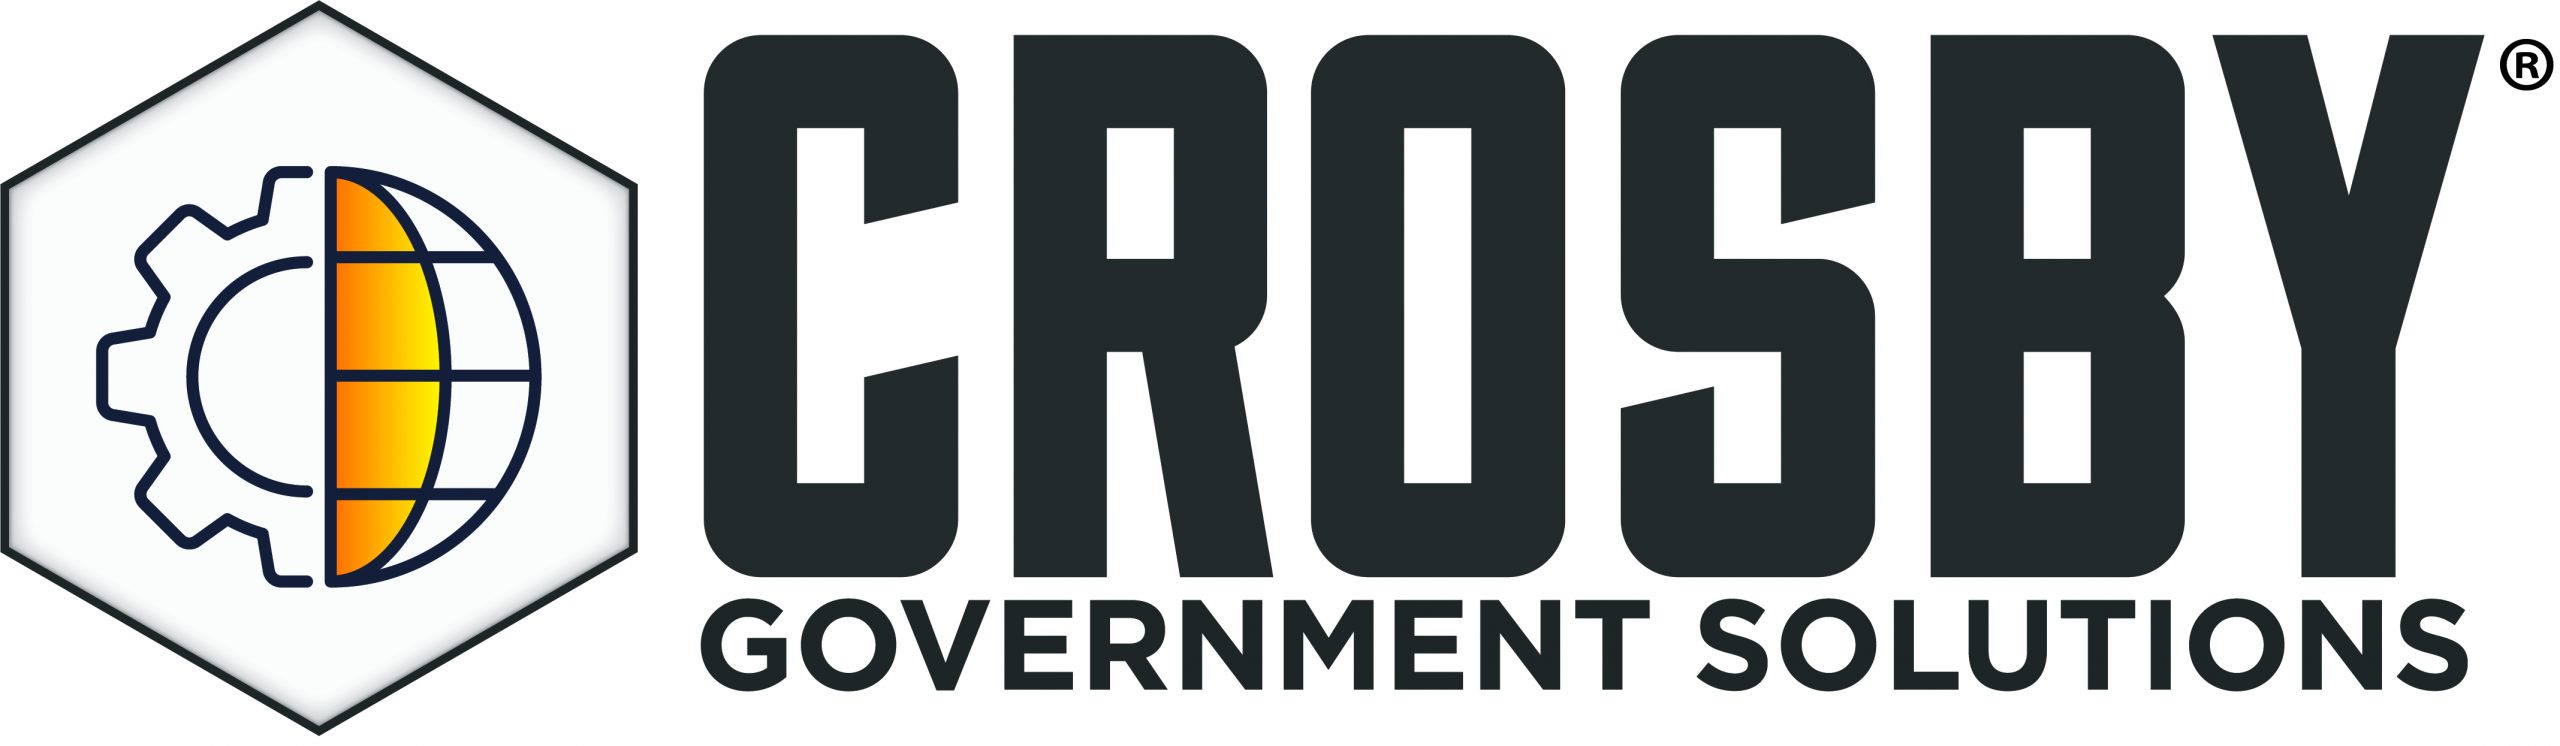 Crosby Governmental Solutions - Coffee Break Monday 10:00 a.m.